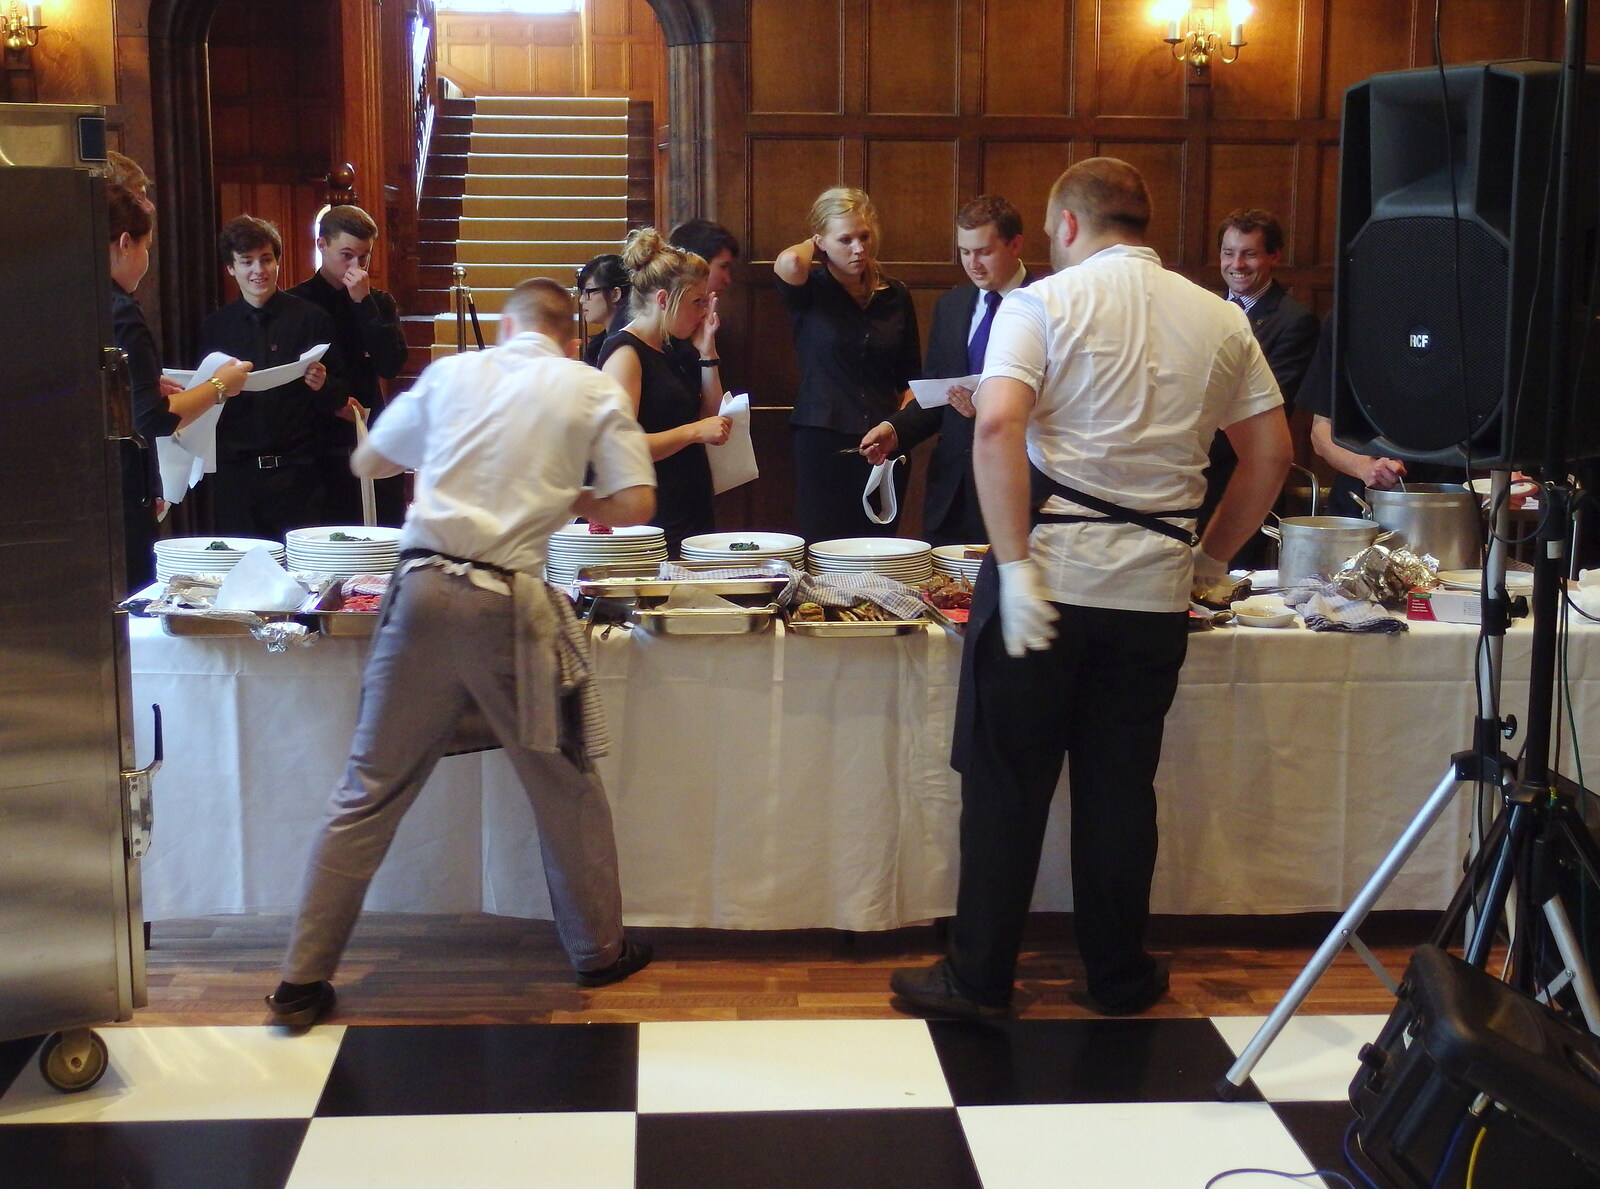 Catering in action from The BBs at Hengrave Hall, Hengrave, Suffolk - 18th August 2013